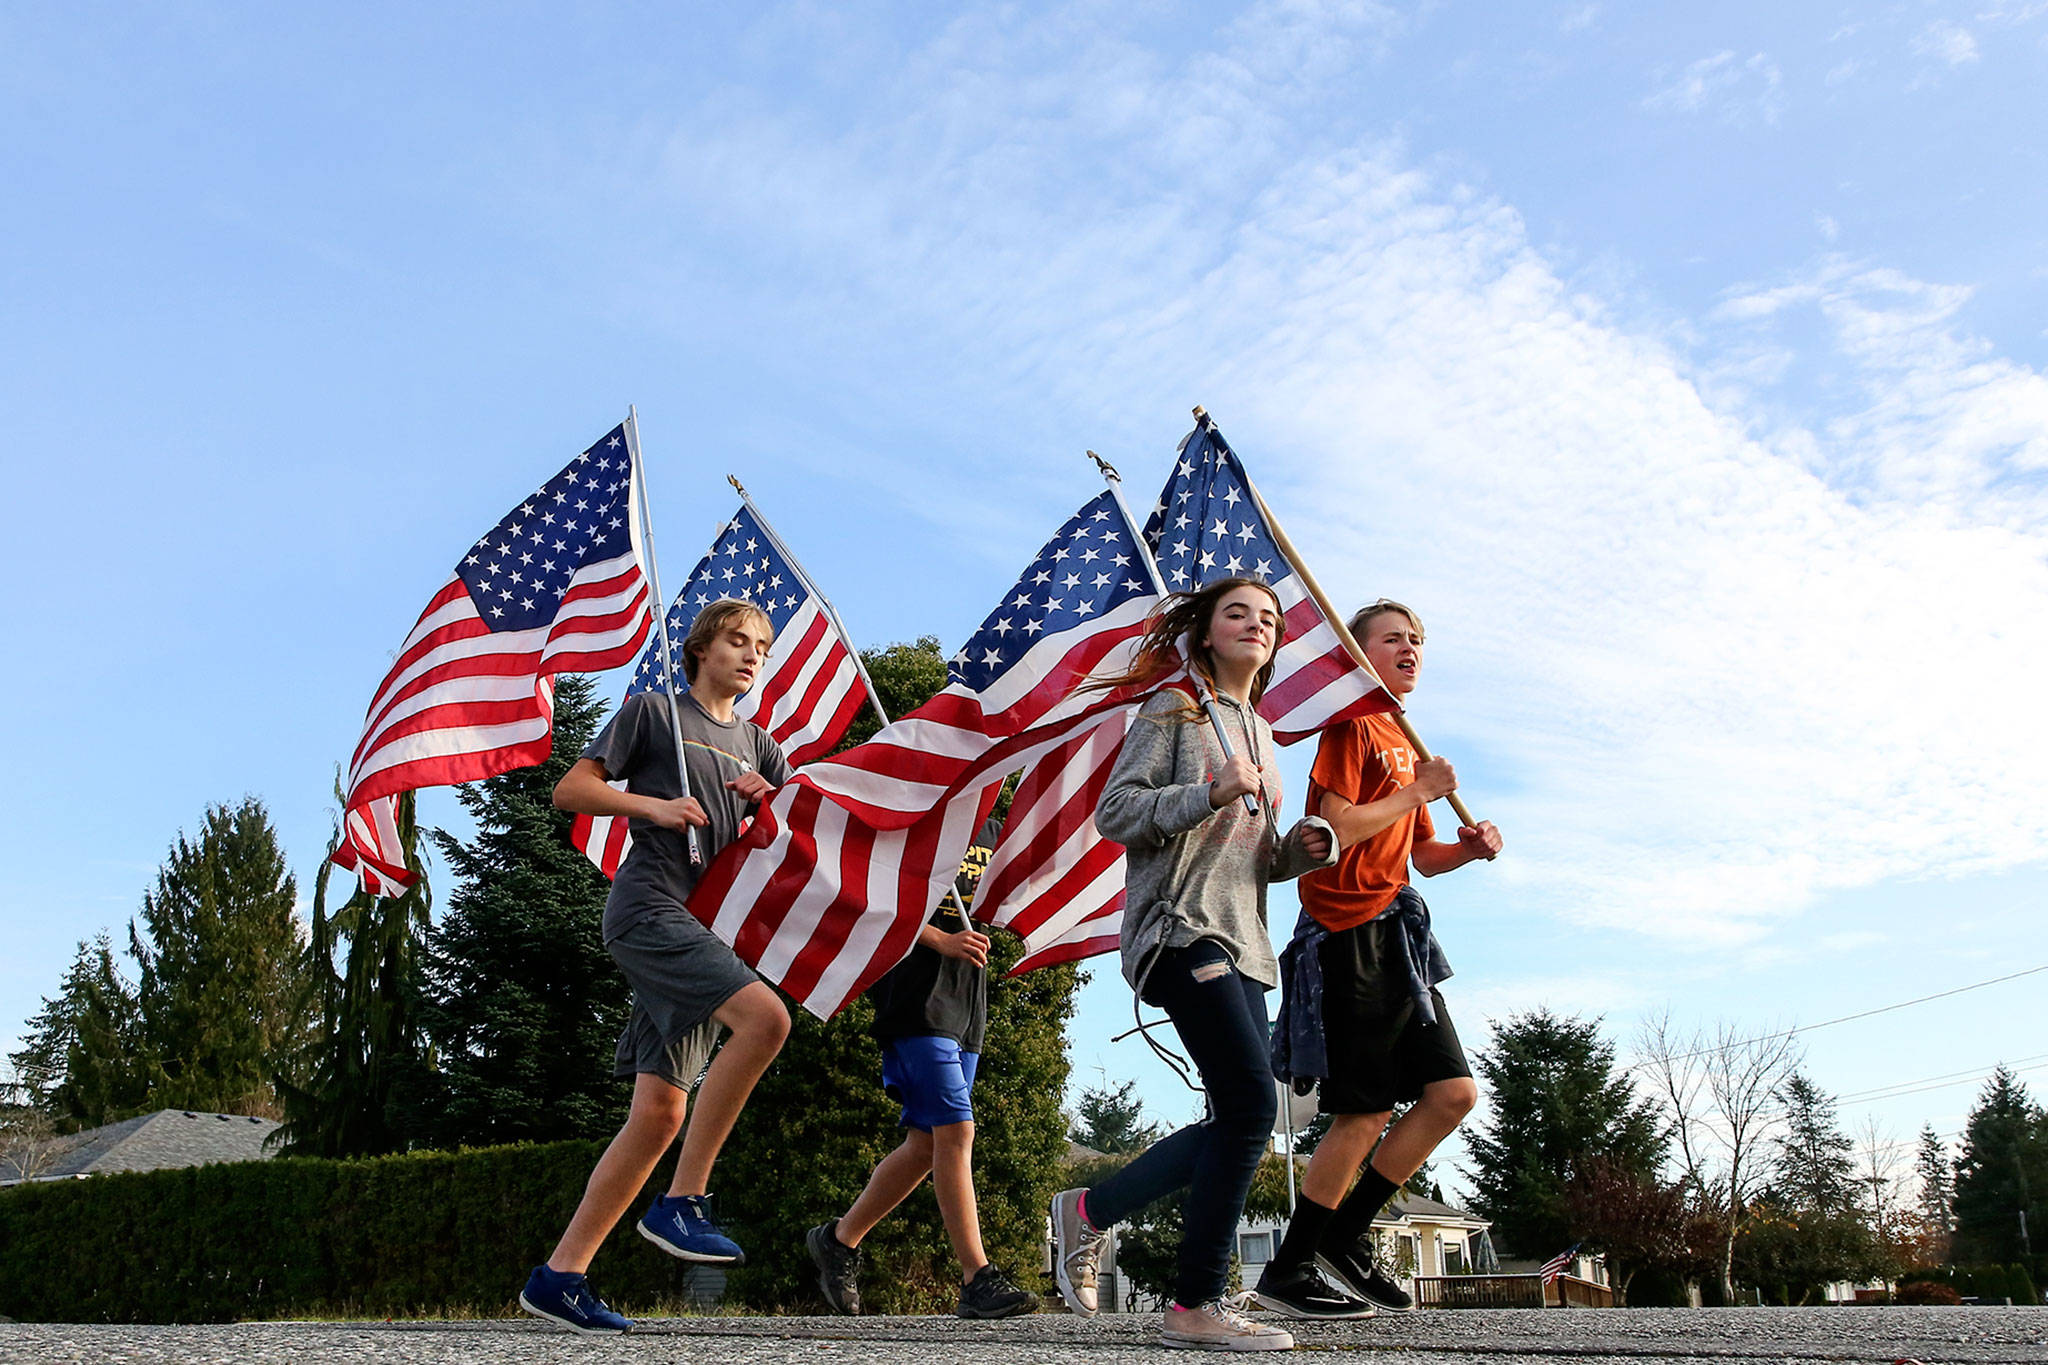 Kids of Granite Falls run in support of veterans mental health and support Friday afternoon in Granite Falls. (Kevin Clark / The Herald)